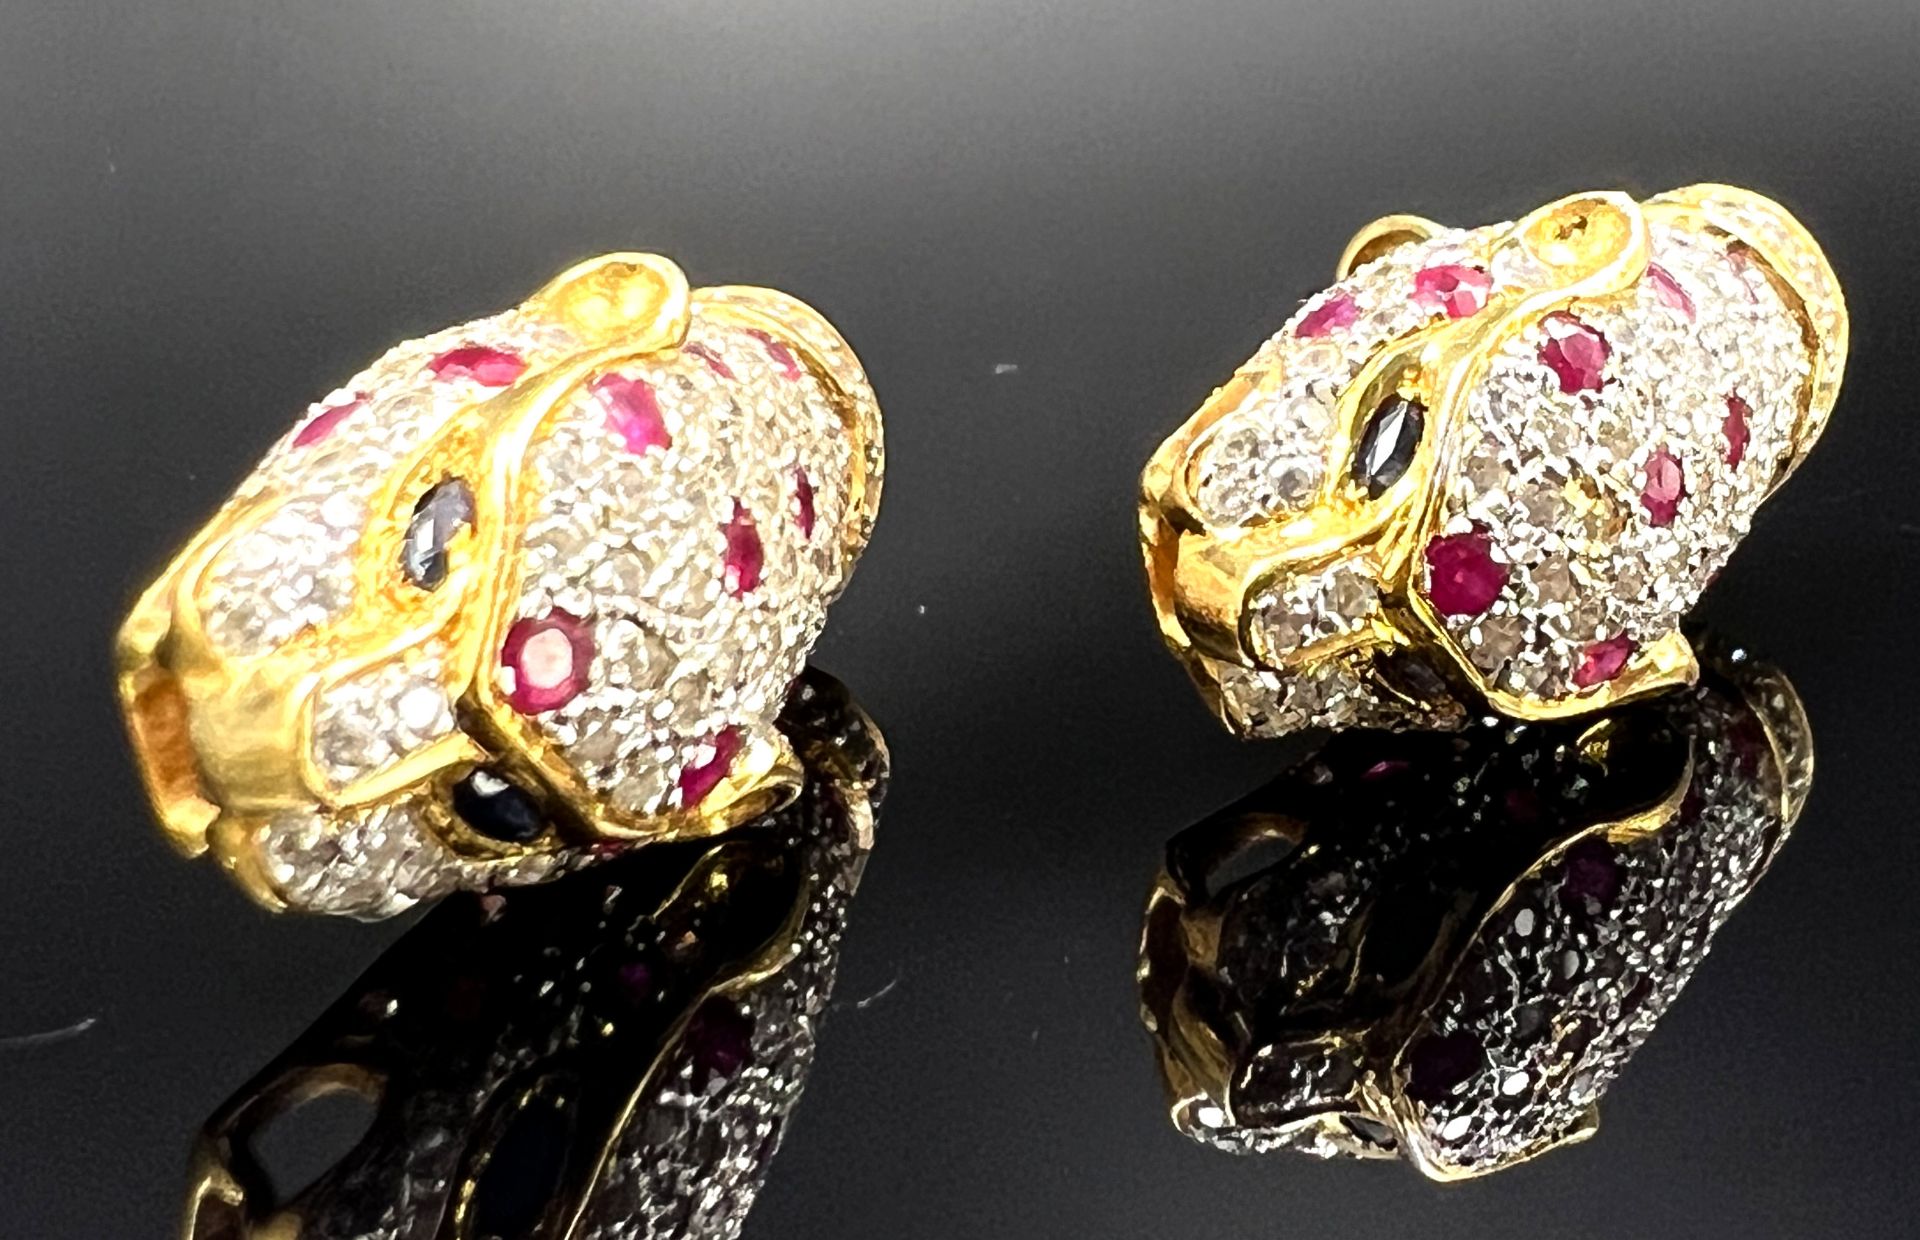 Pair of "Cheetah" stud earrings. 750 yellow gold and white gold with gemstone setting. - Image 3 of 8